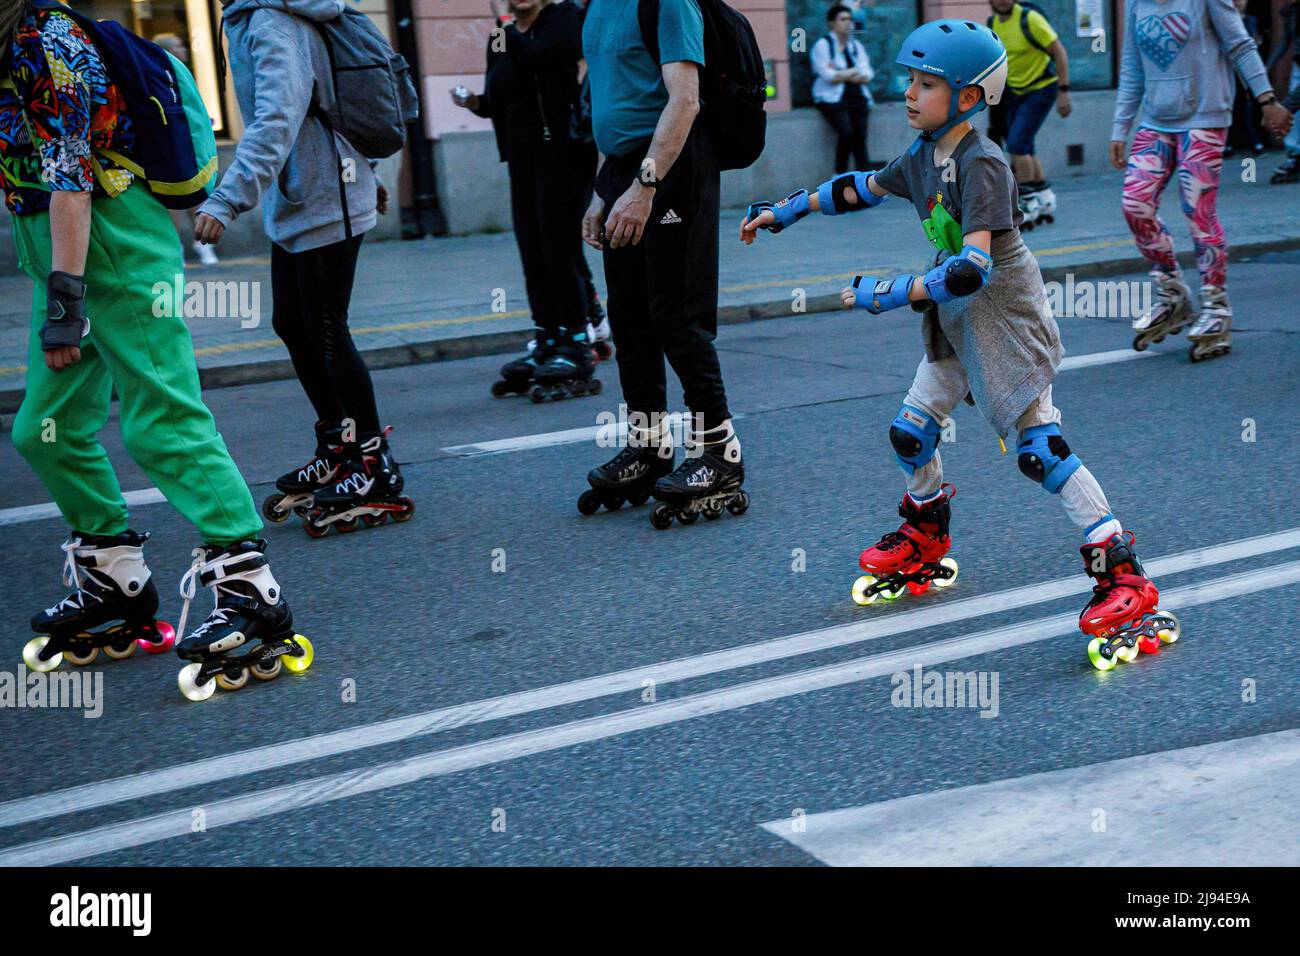 A boy wears a helmet while roller skating during the "Nightskating Warsaw"  event in the center of the city. Night skating Warsaw is a popular series  of night roller skating rides along